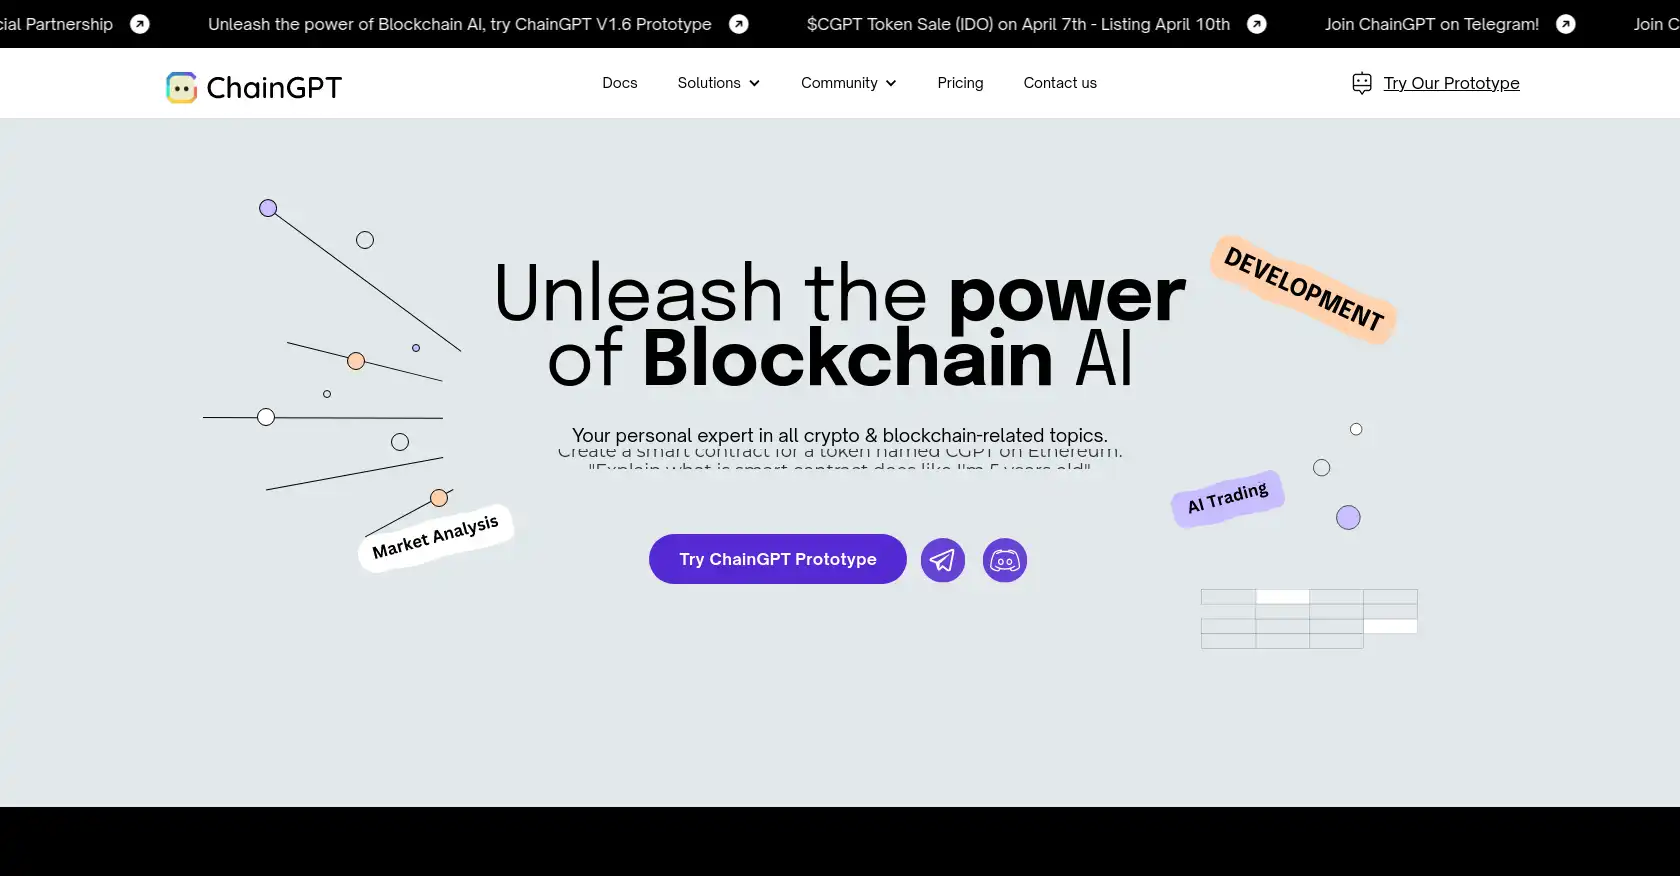 ChainGPT - AI tool for Blockchain, Ethereum, Smart contracts